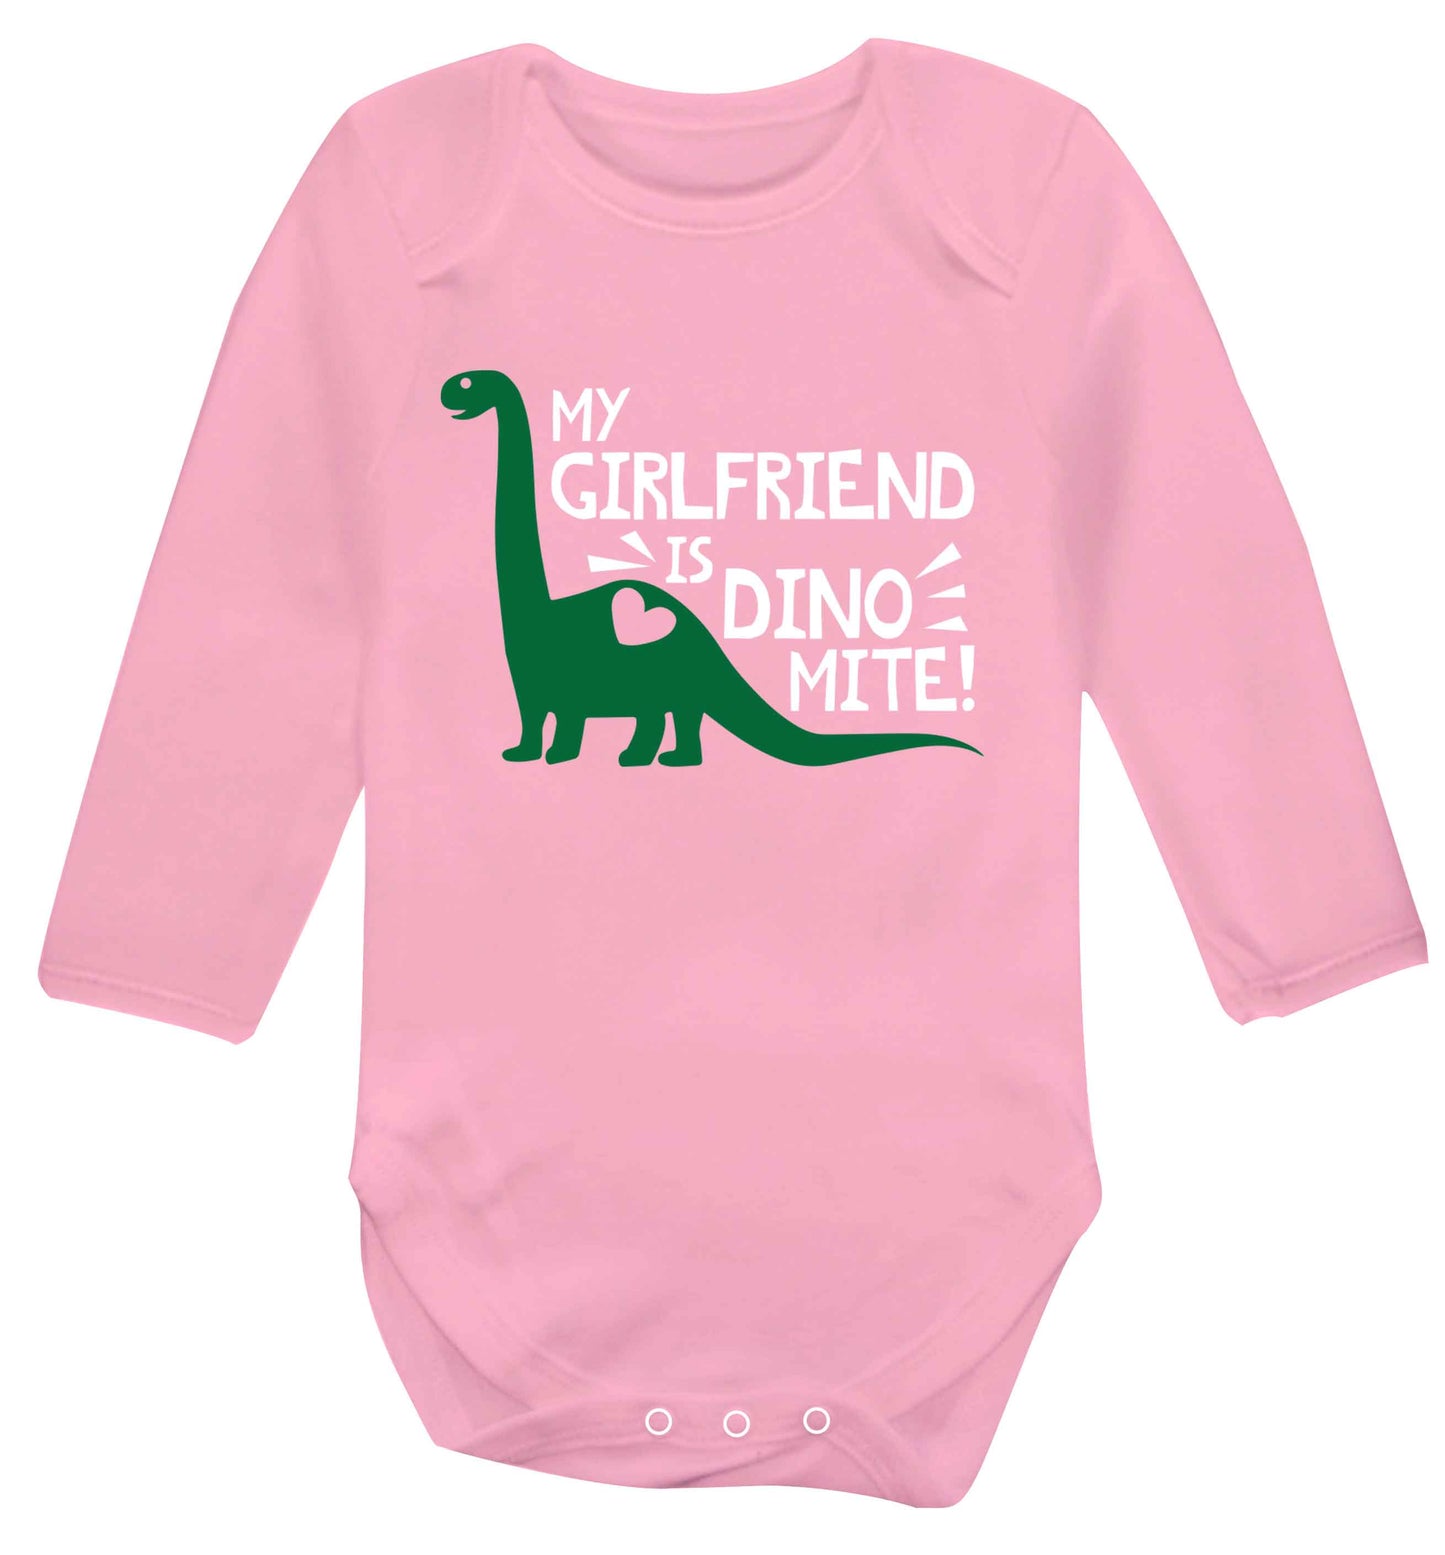 My girlfriend is dinomite! Baby Vest long sleeved pale pink 6-12 months